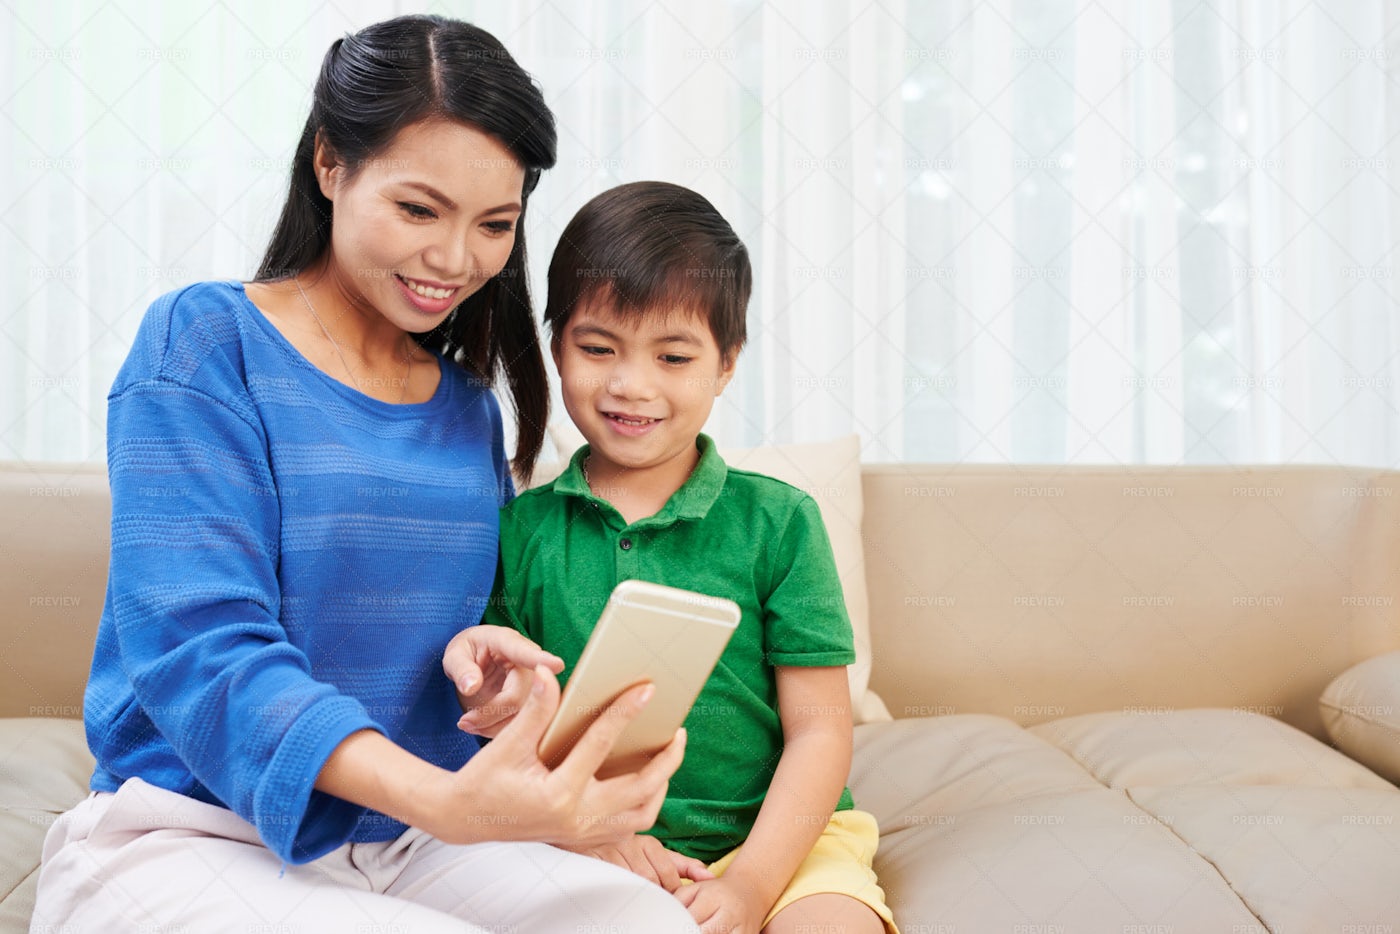 Mother And Son Using Smartphone: Stock Photos